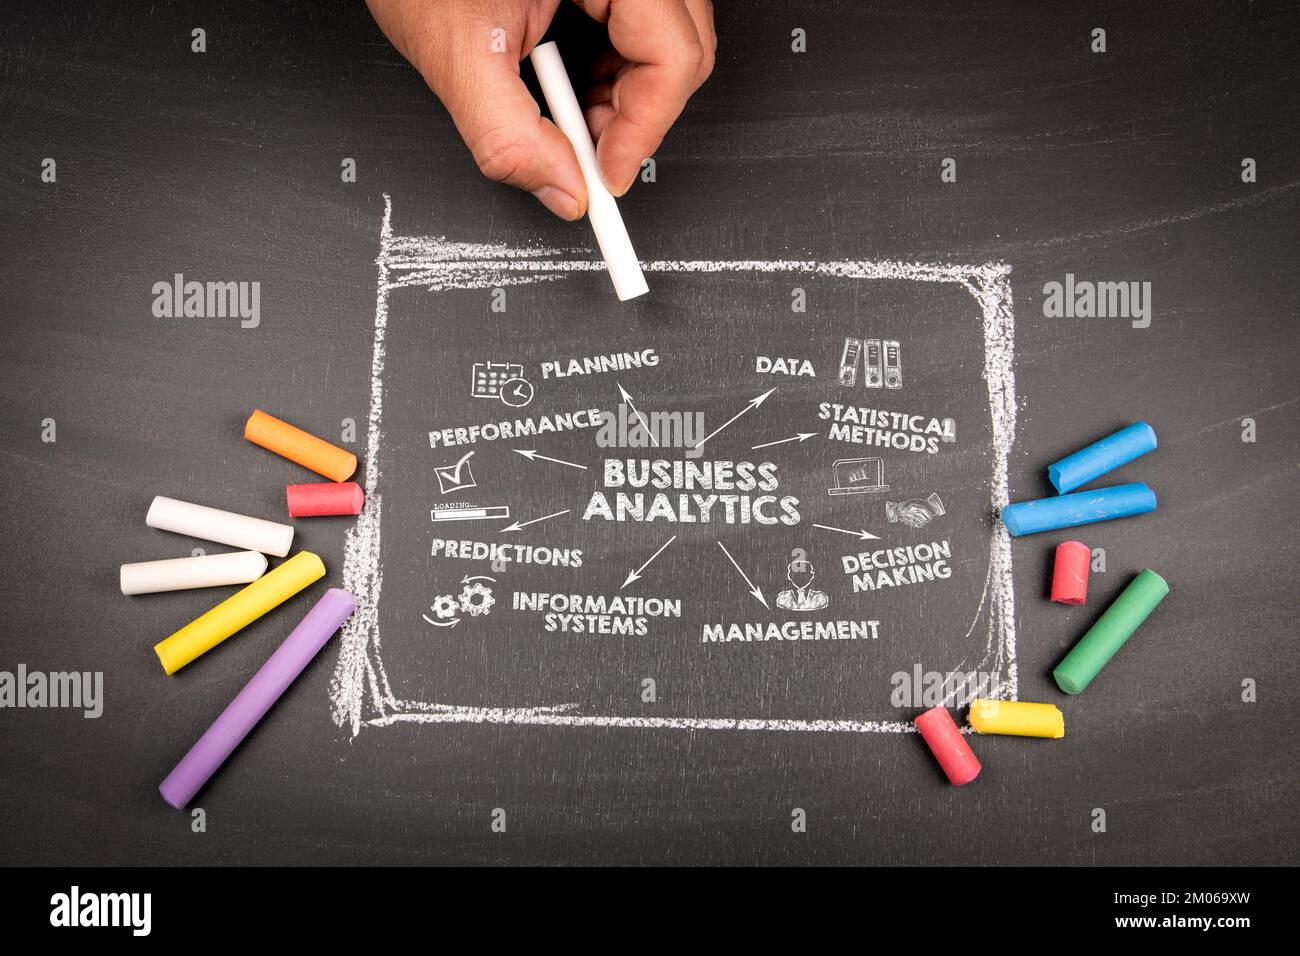 Business Analytics. Planning, Statistical methods, management and information systems concept. Chart with keywords. Stock Photo